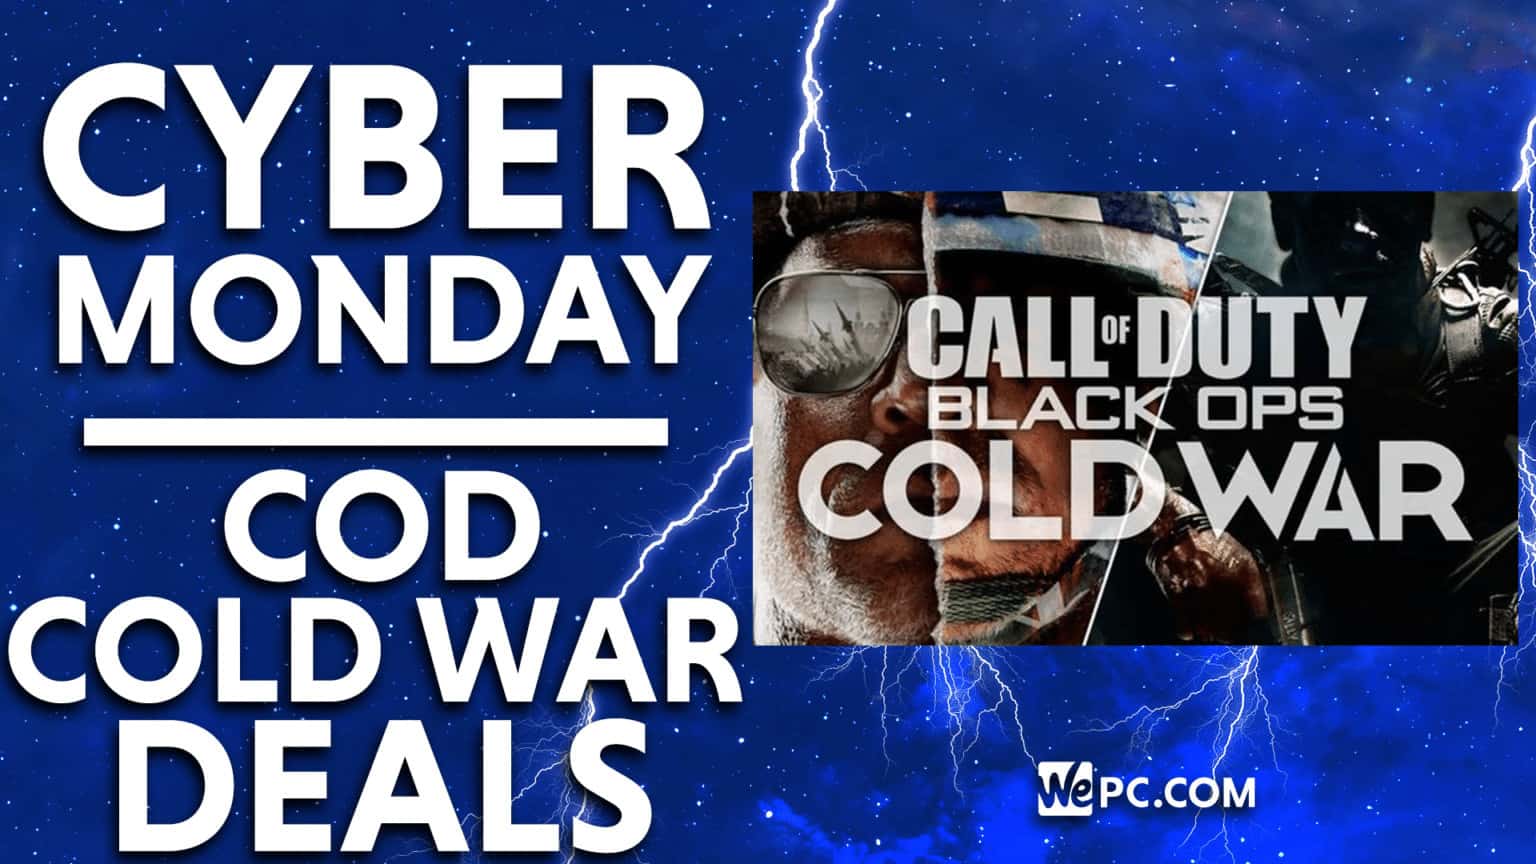 call of duty cold war cyber monday deal